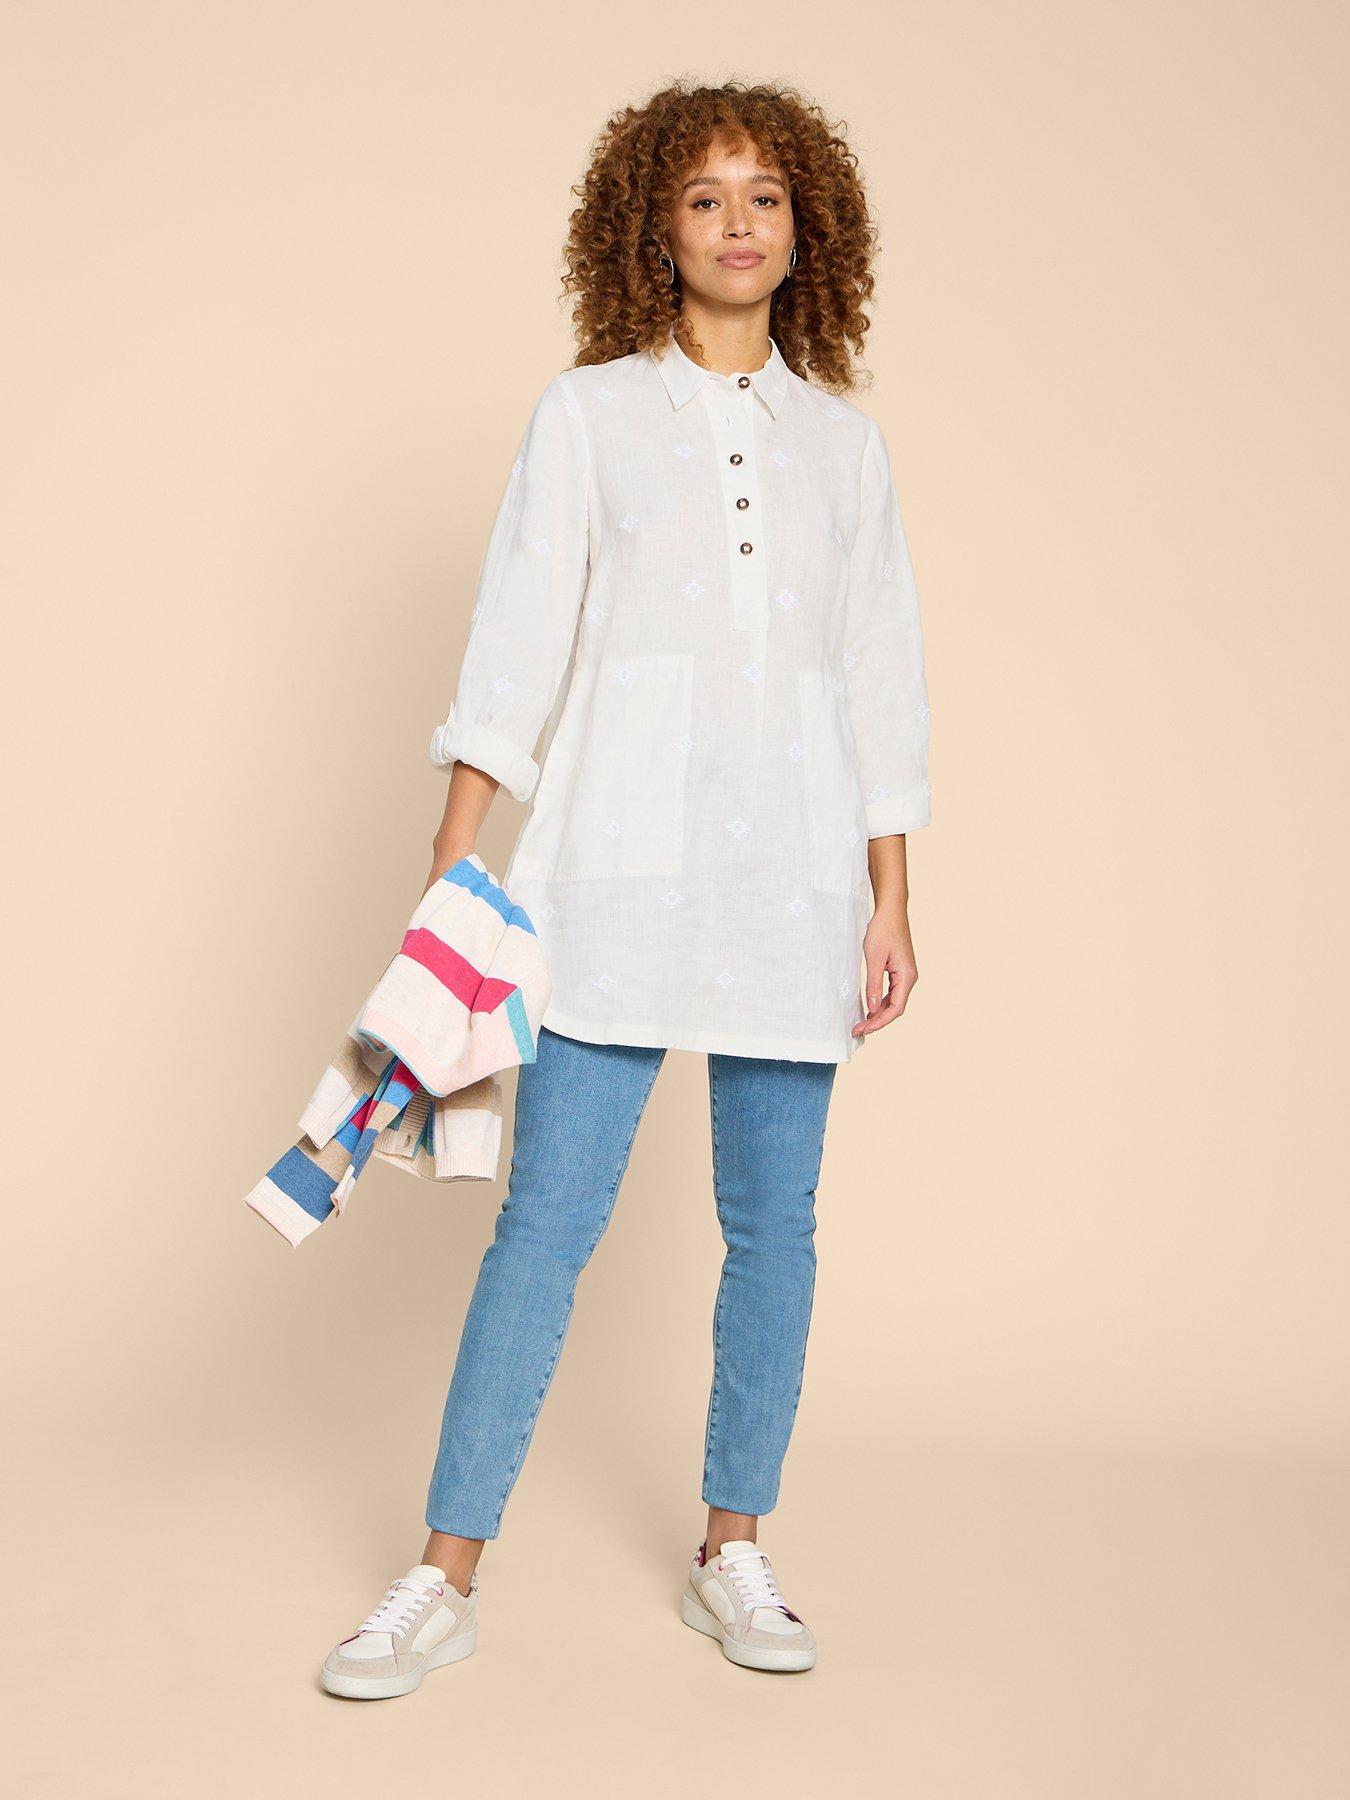 Shell-Embellished Linen Tunic Top